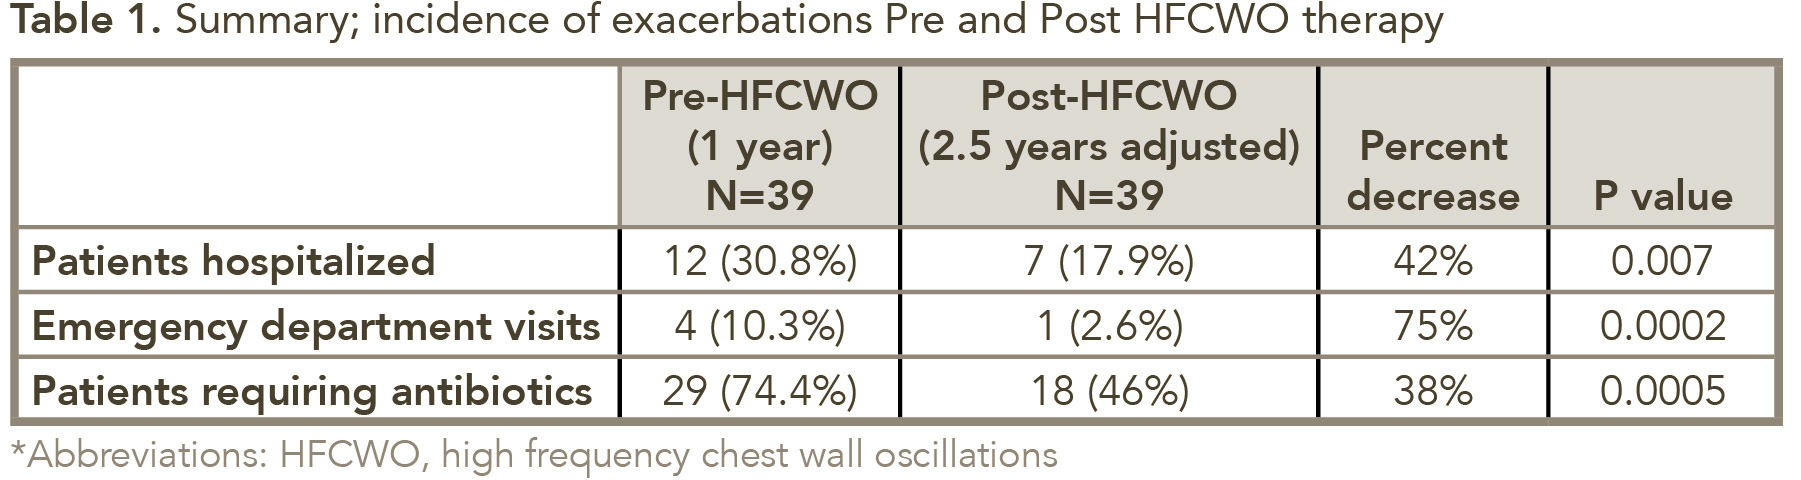 Pre and Post HFCWO therapy